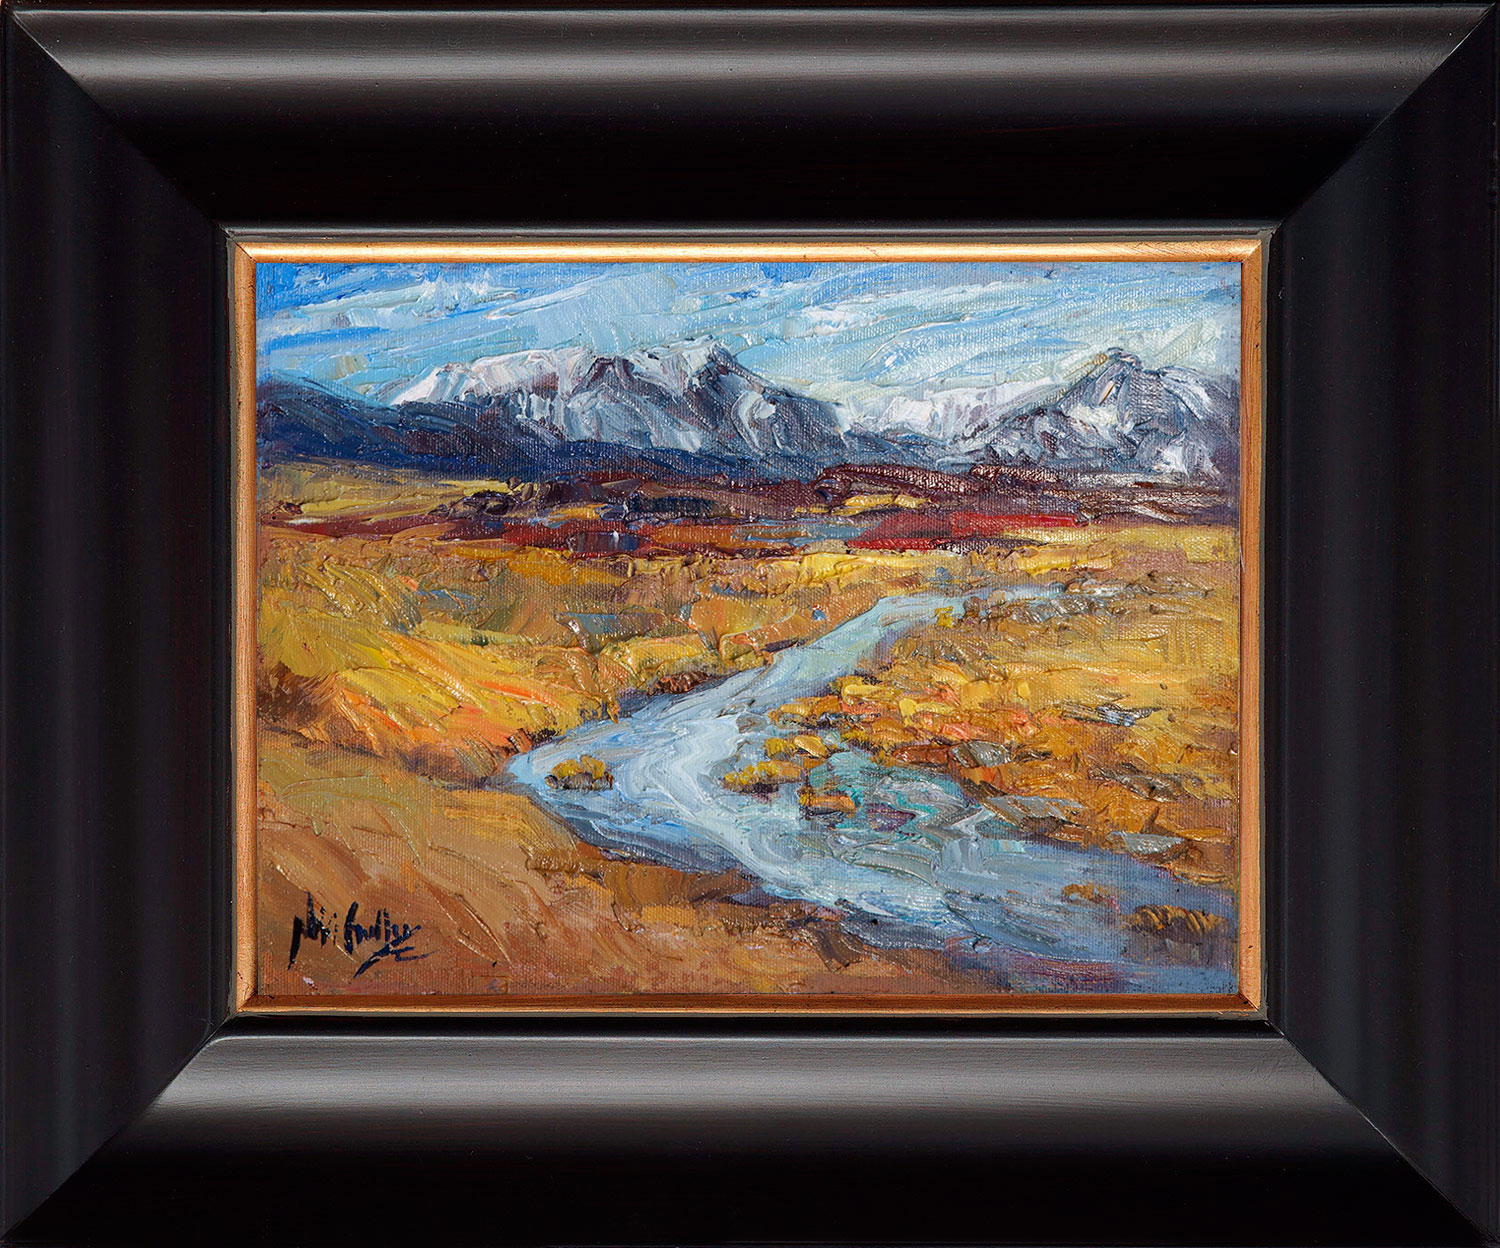 Iceland, contemporary impressionist, dallas texas artist, travel art, Niki Gulley paintings